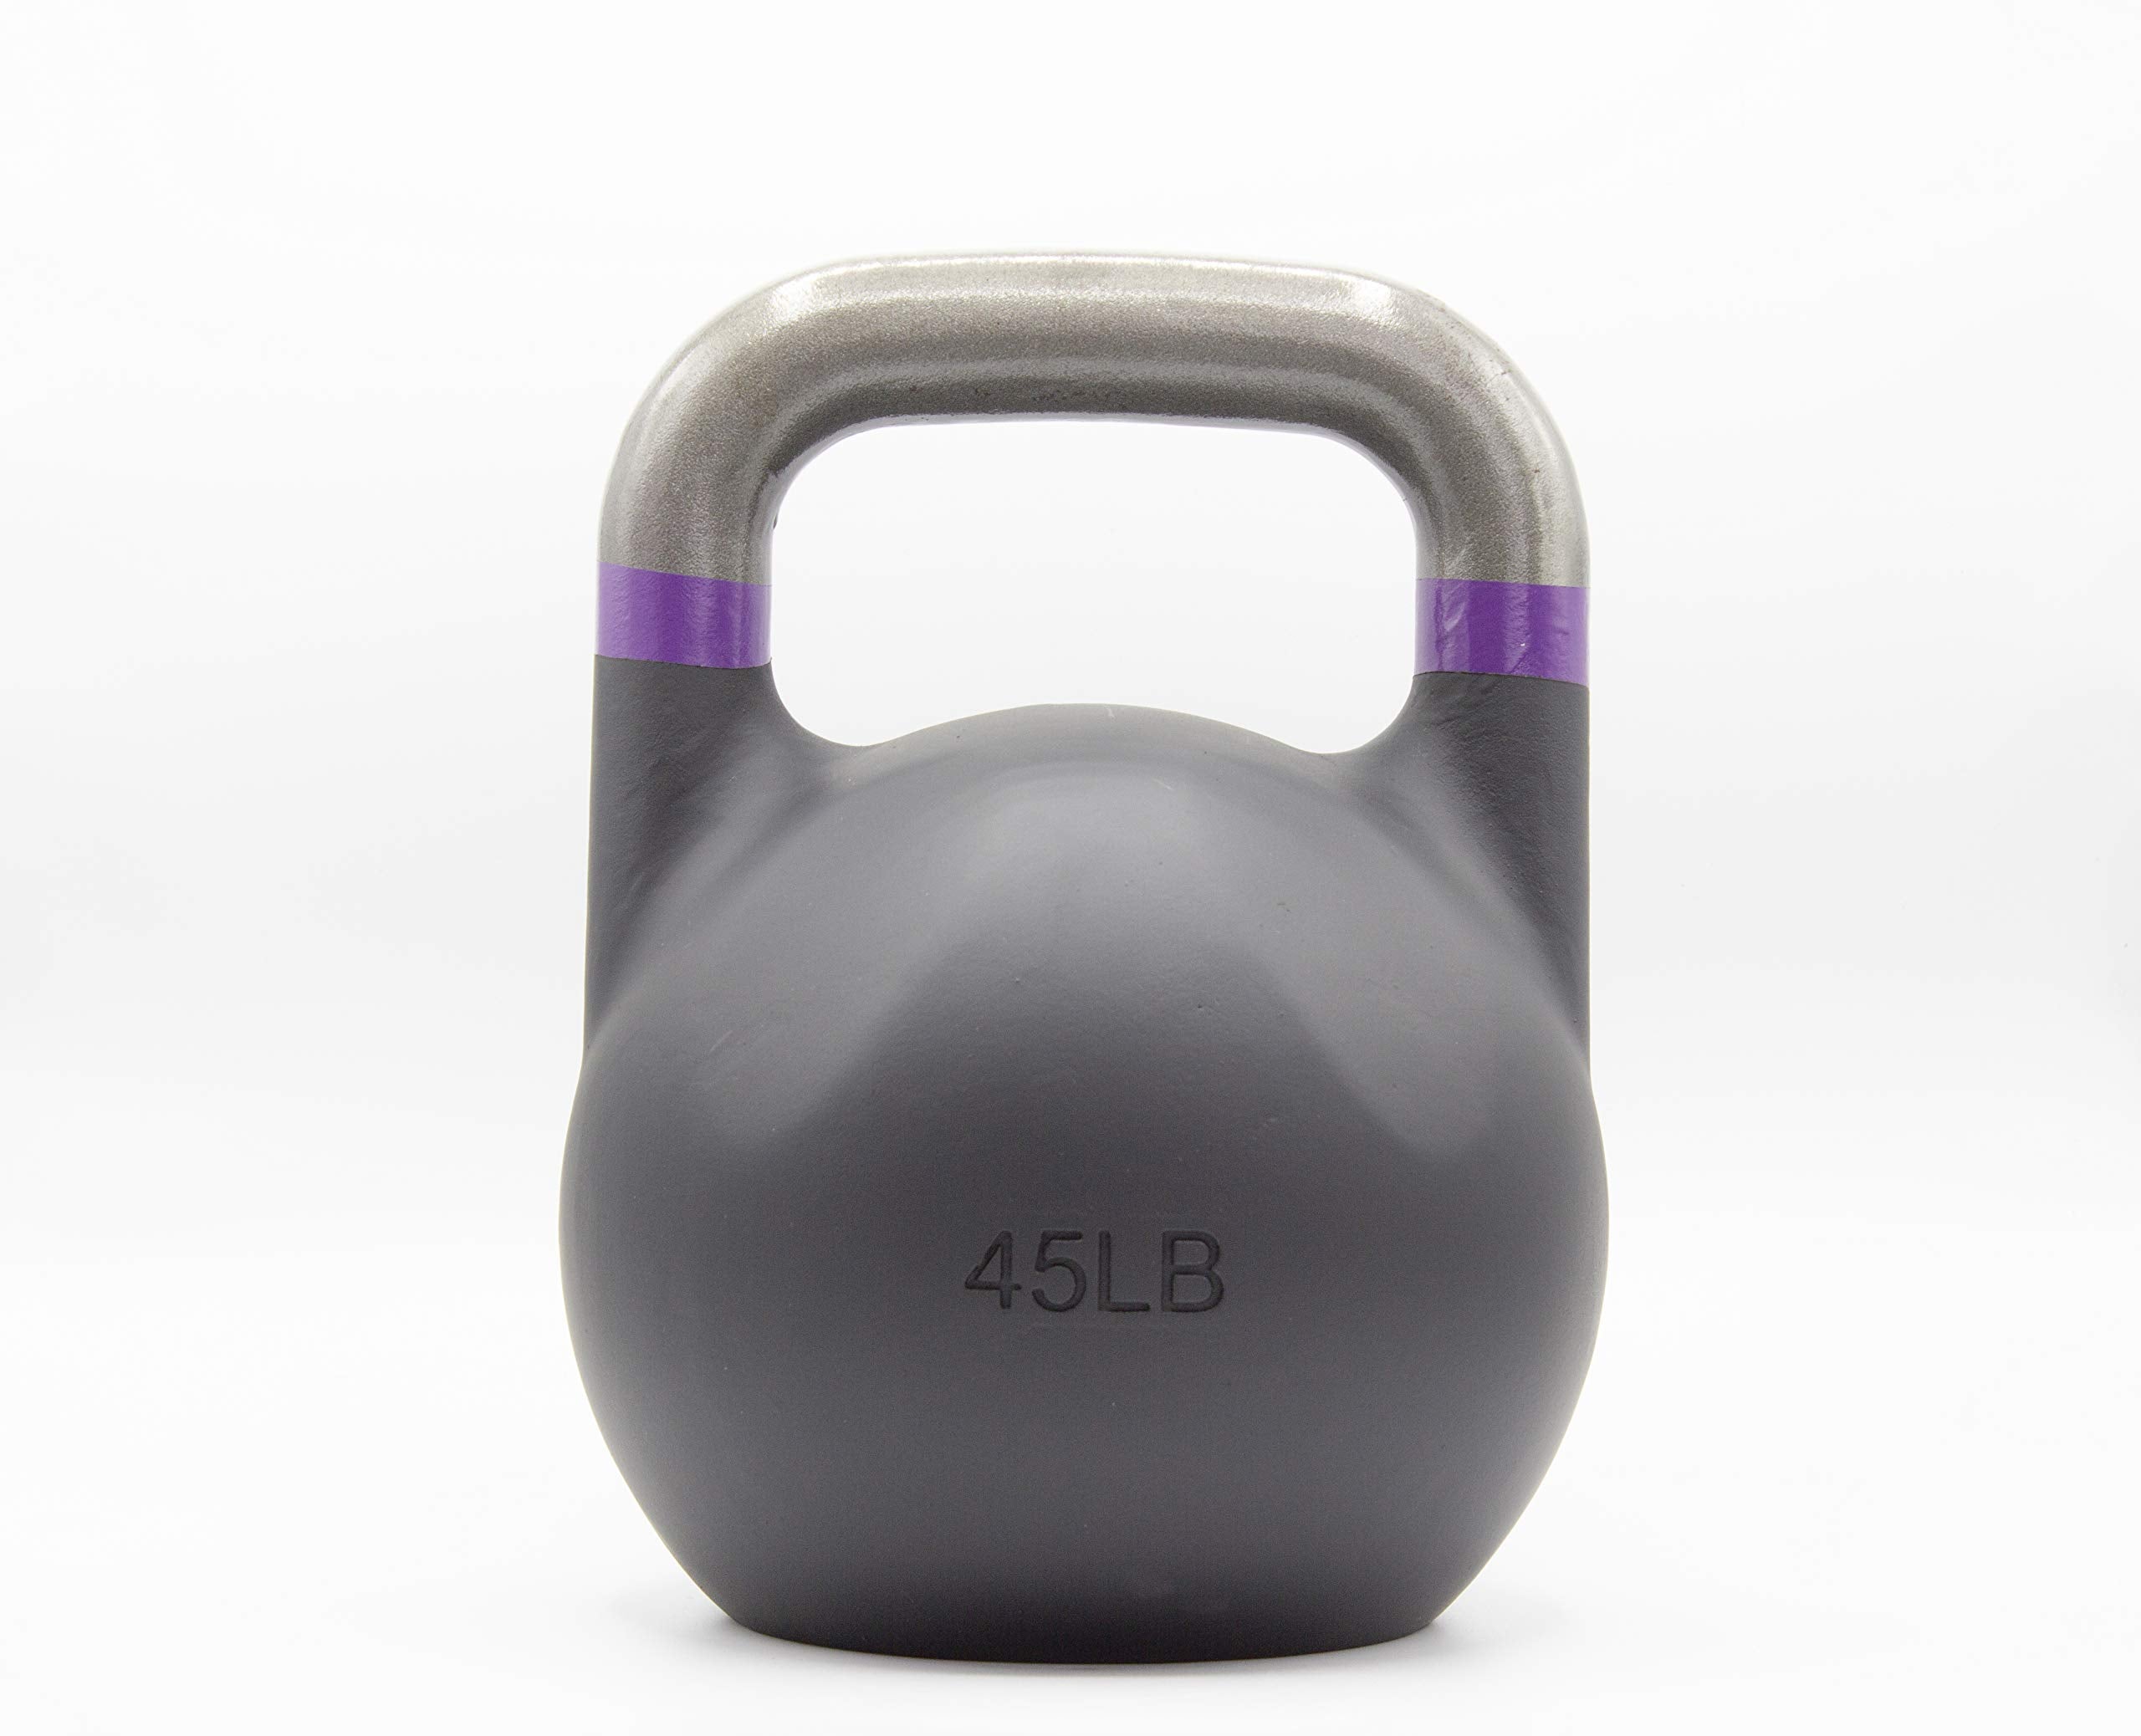 Competition Kettlebell - Fitness Edition